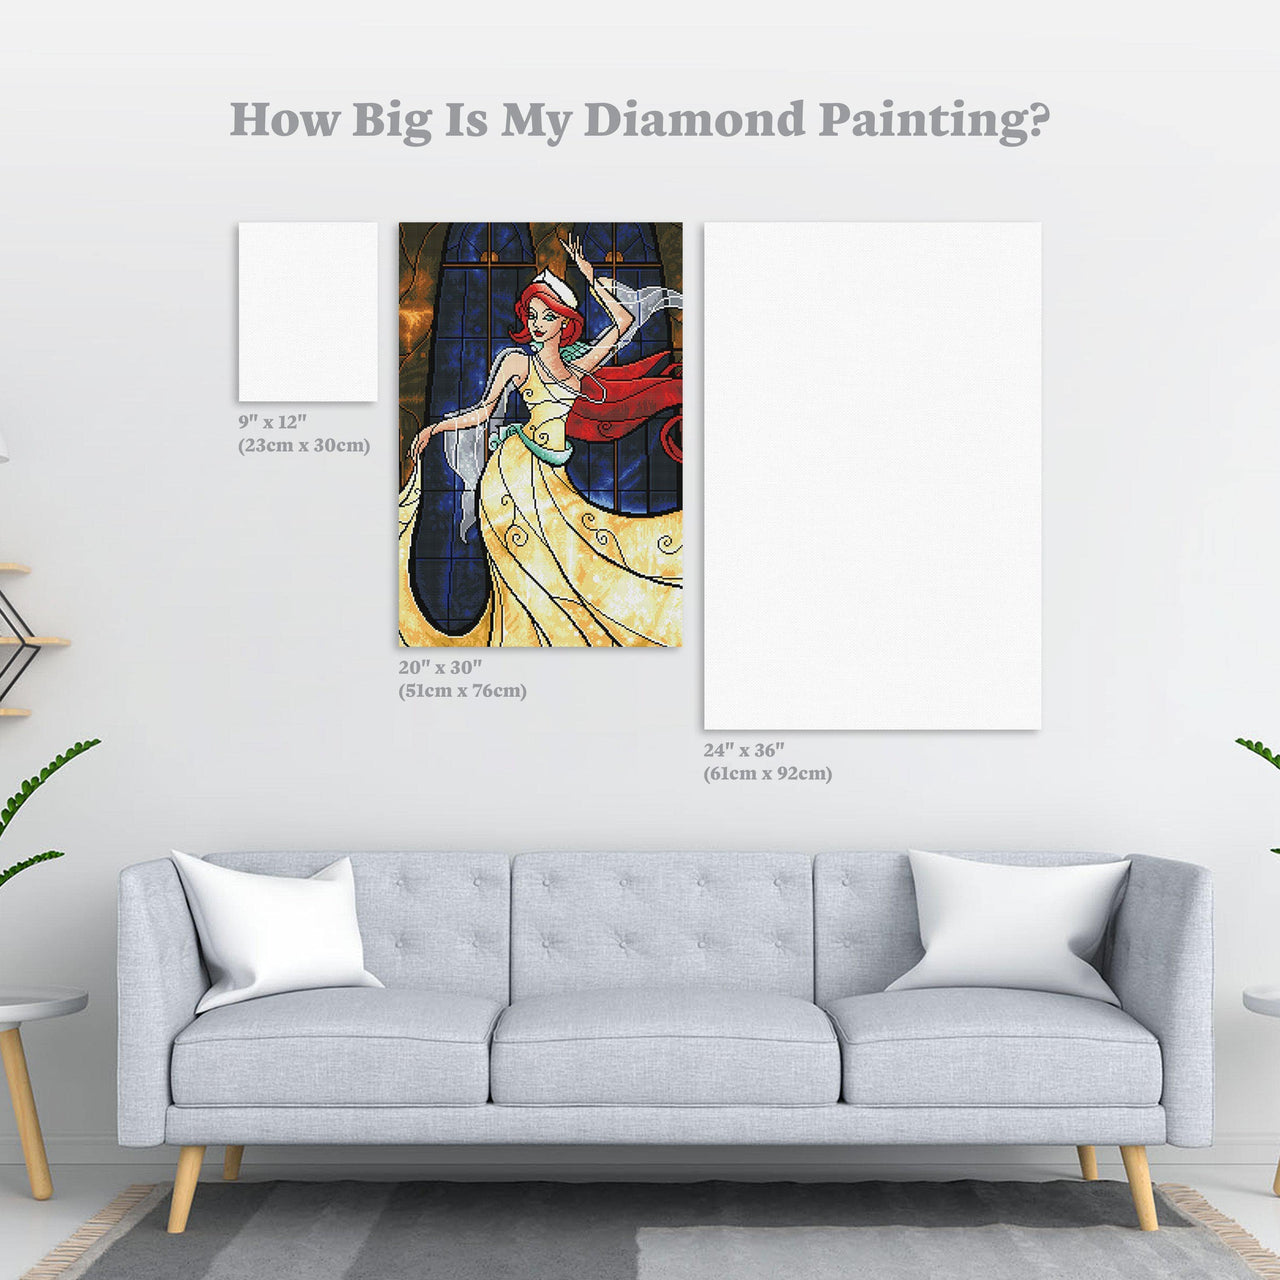 Diamond Painting Once Upon a December 20" x 30″ (51cm x 76 cm) / Round with 40 Colors Including 1 AB / 48,600